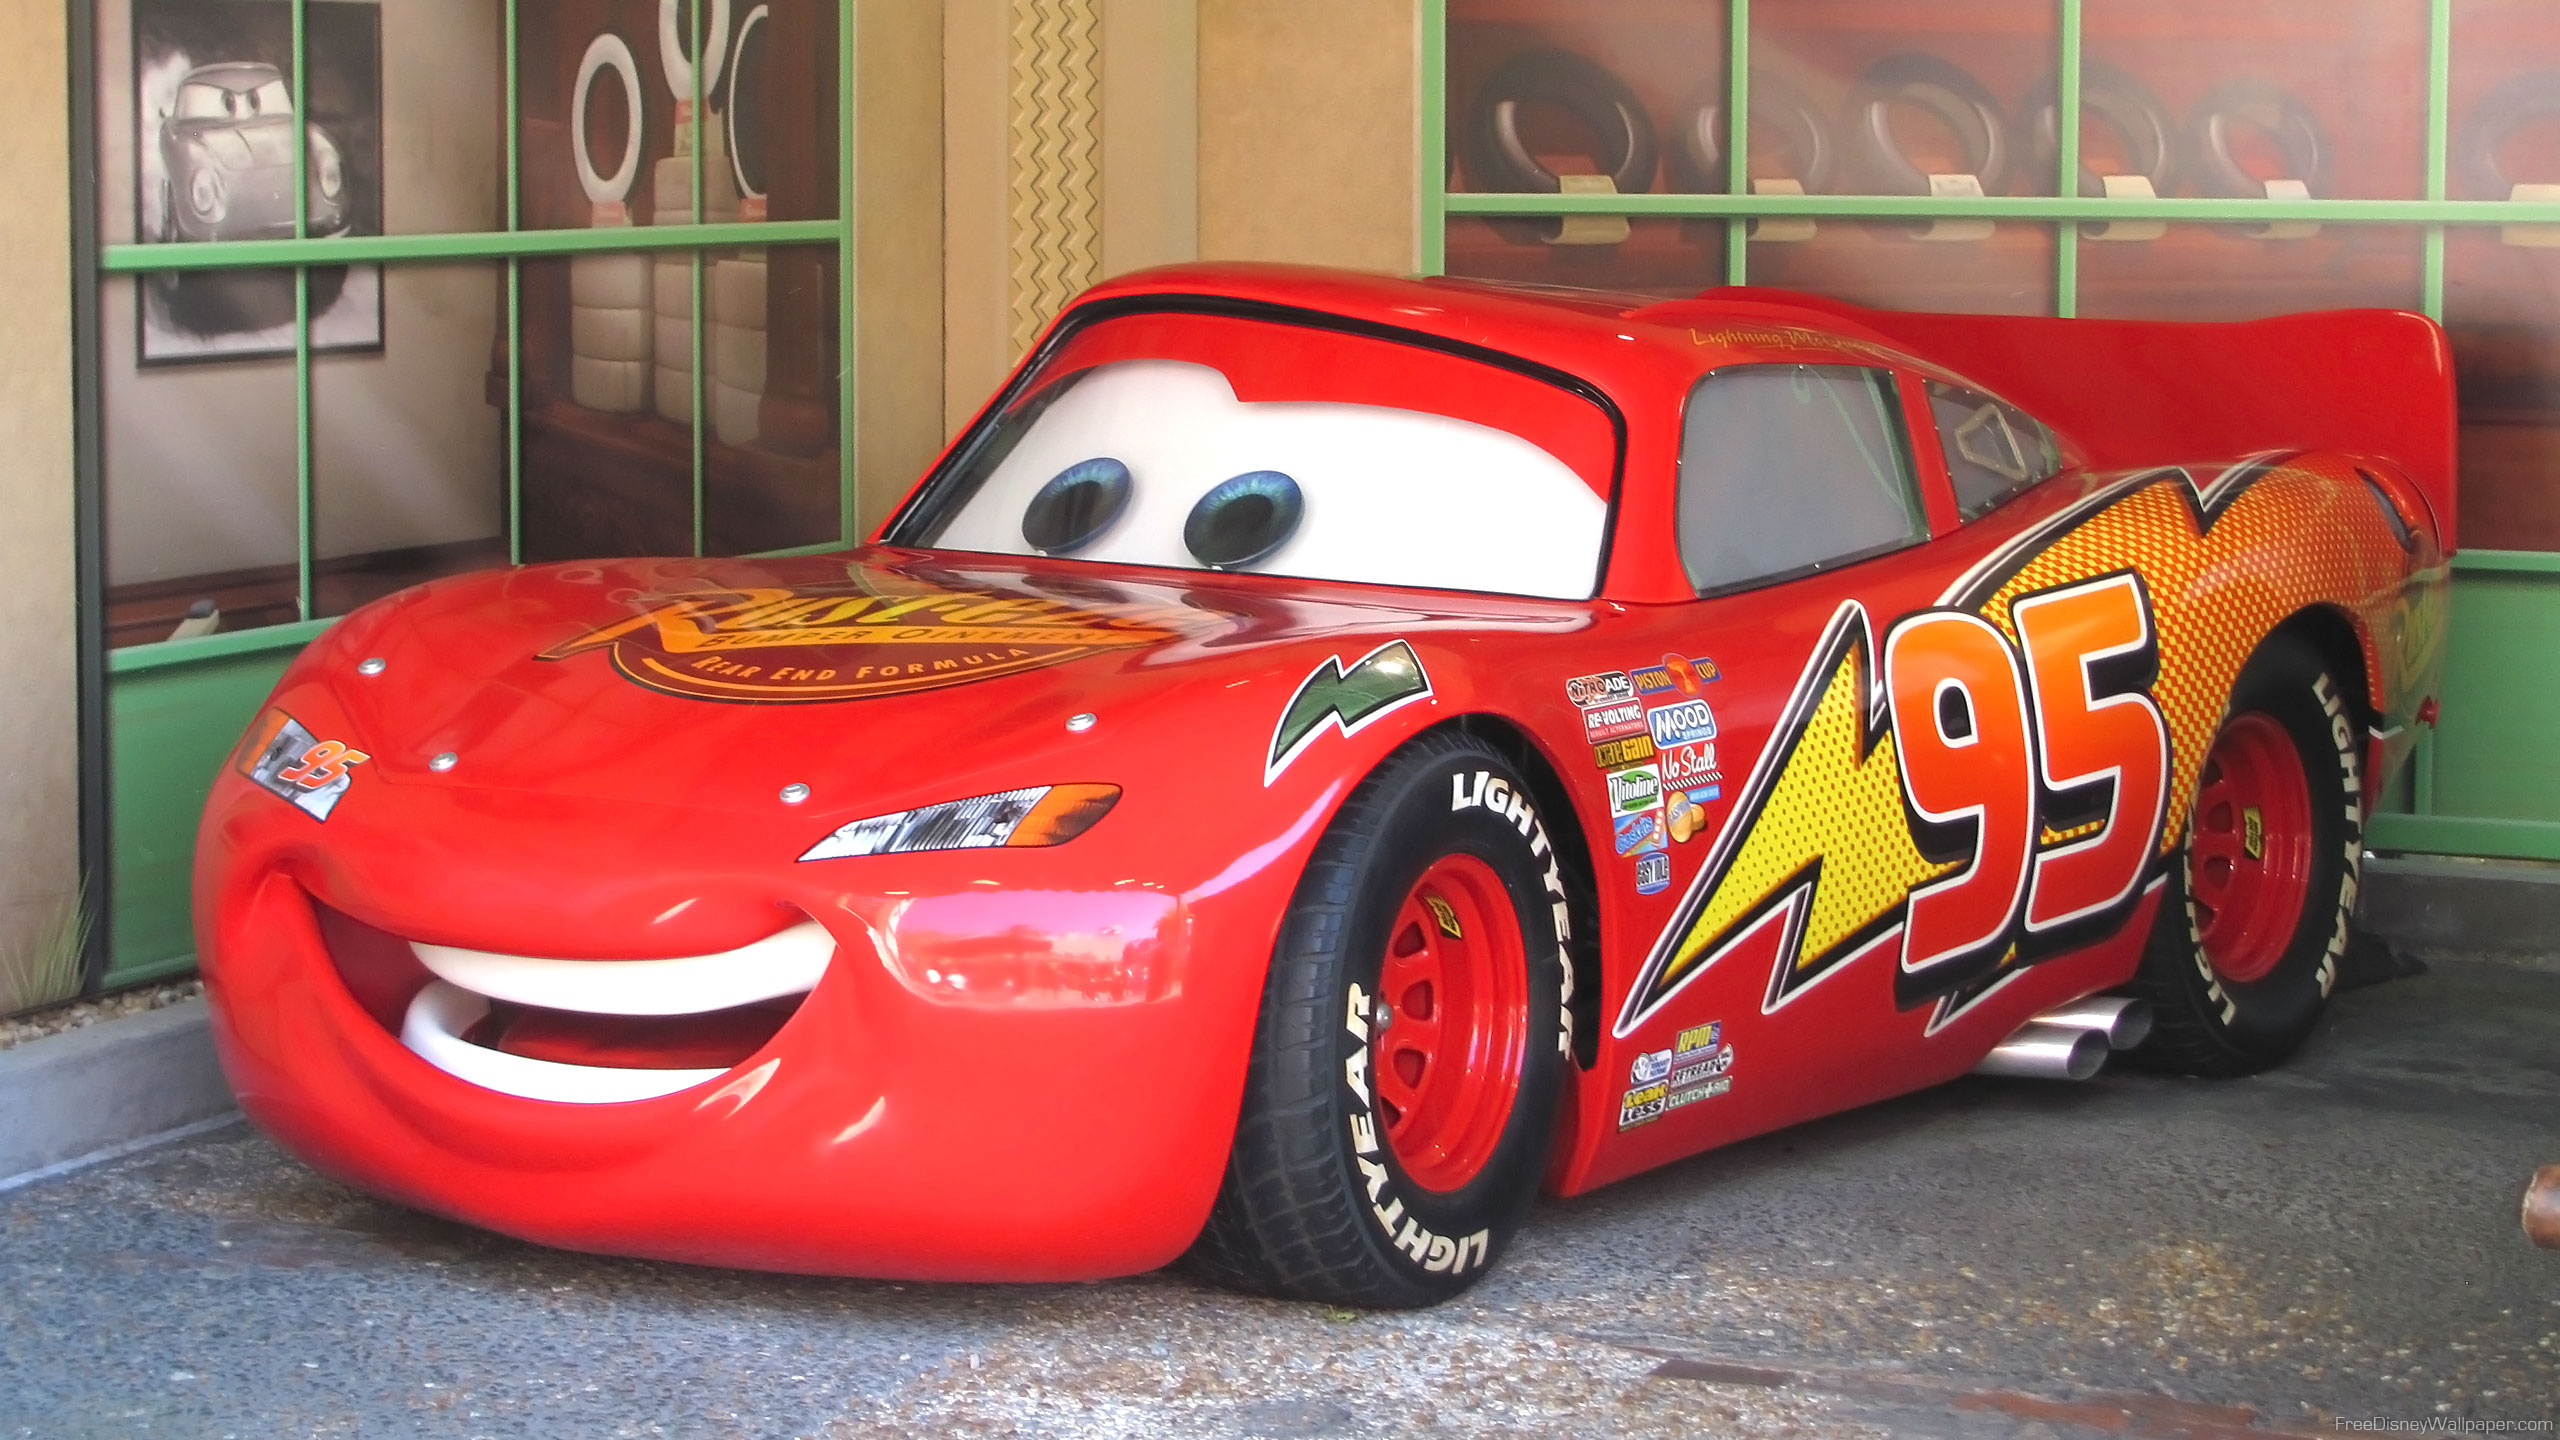 cars mcqueen wallpaper,car,vehicle,model car,radio controlled car,toy